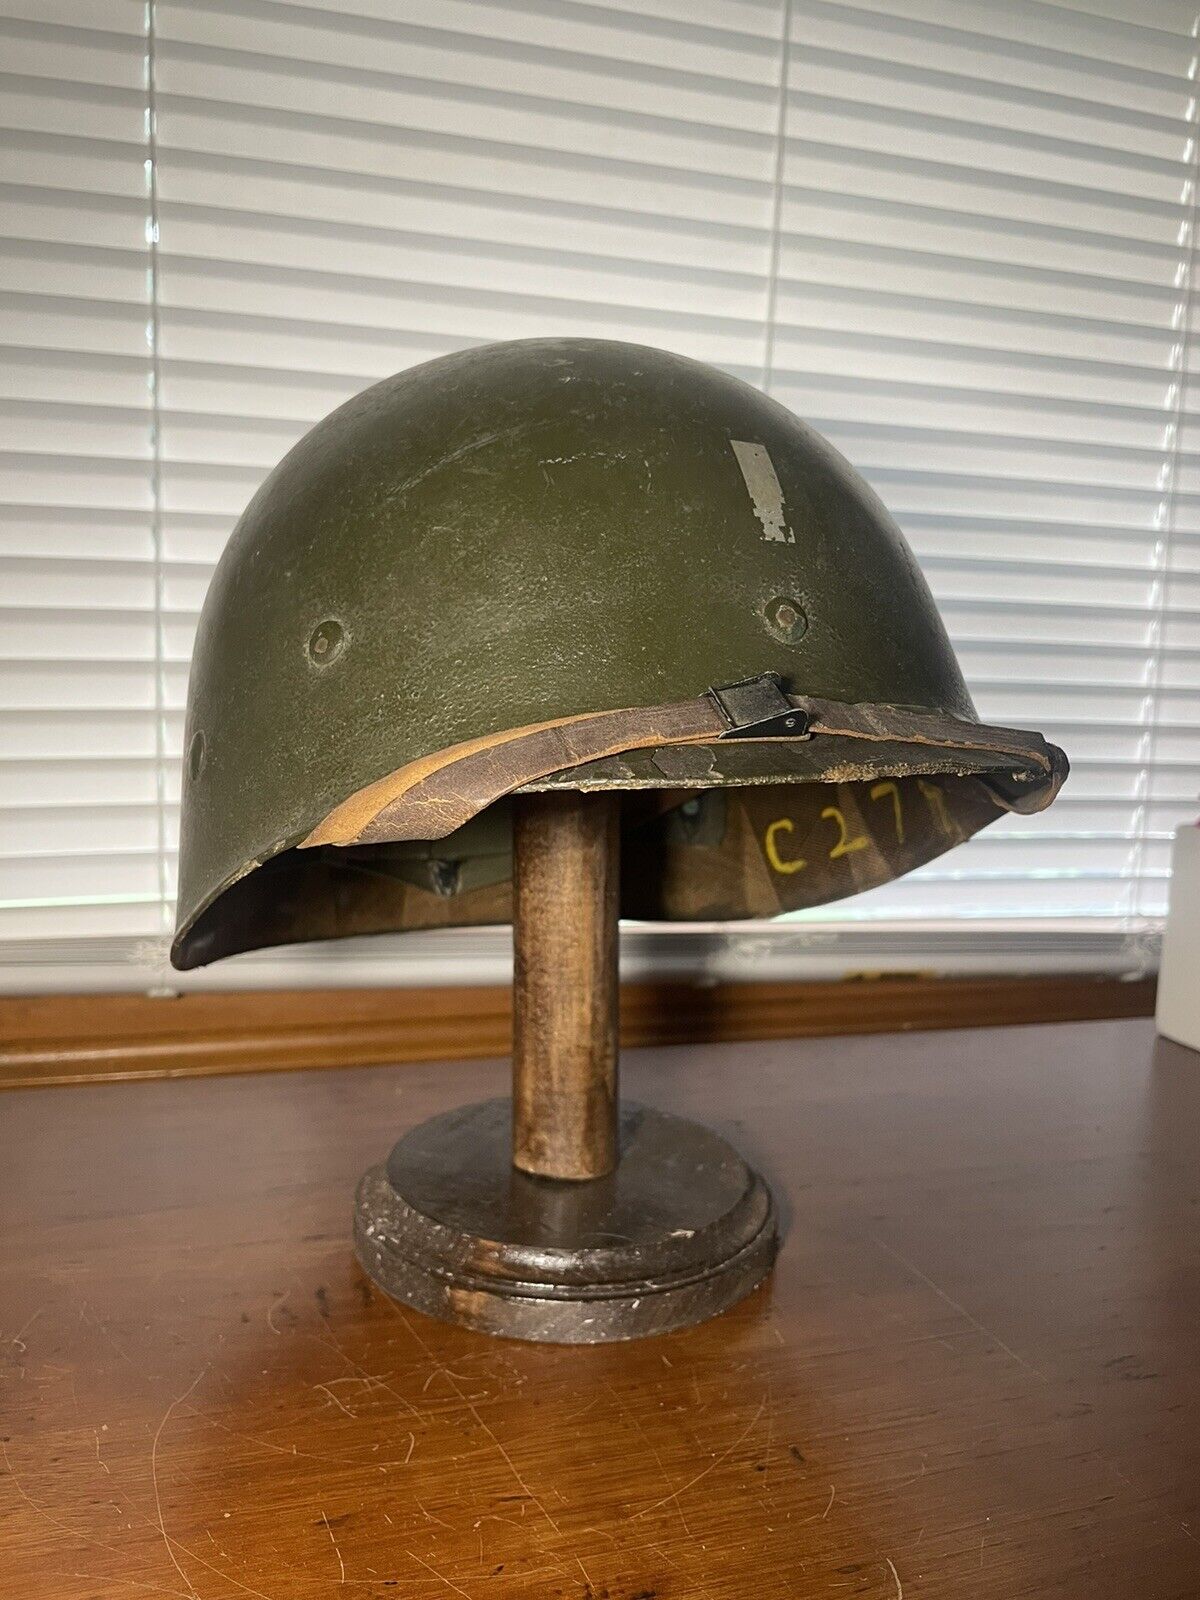 Post WW2 US Military Helmet Liner 280th Field Artillery Battalion, 2nd Army